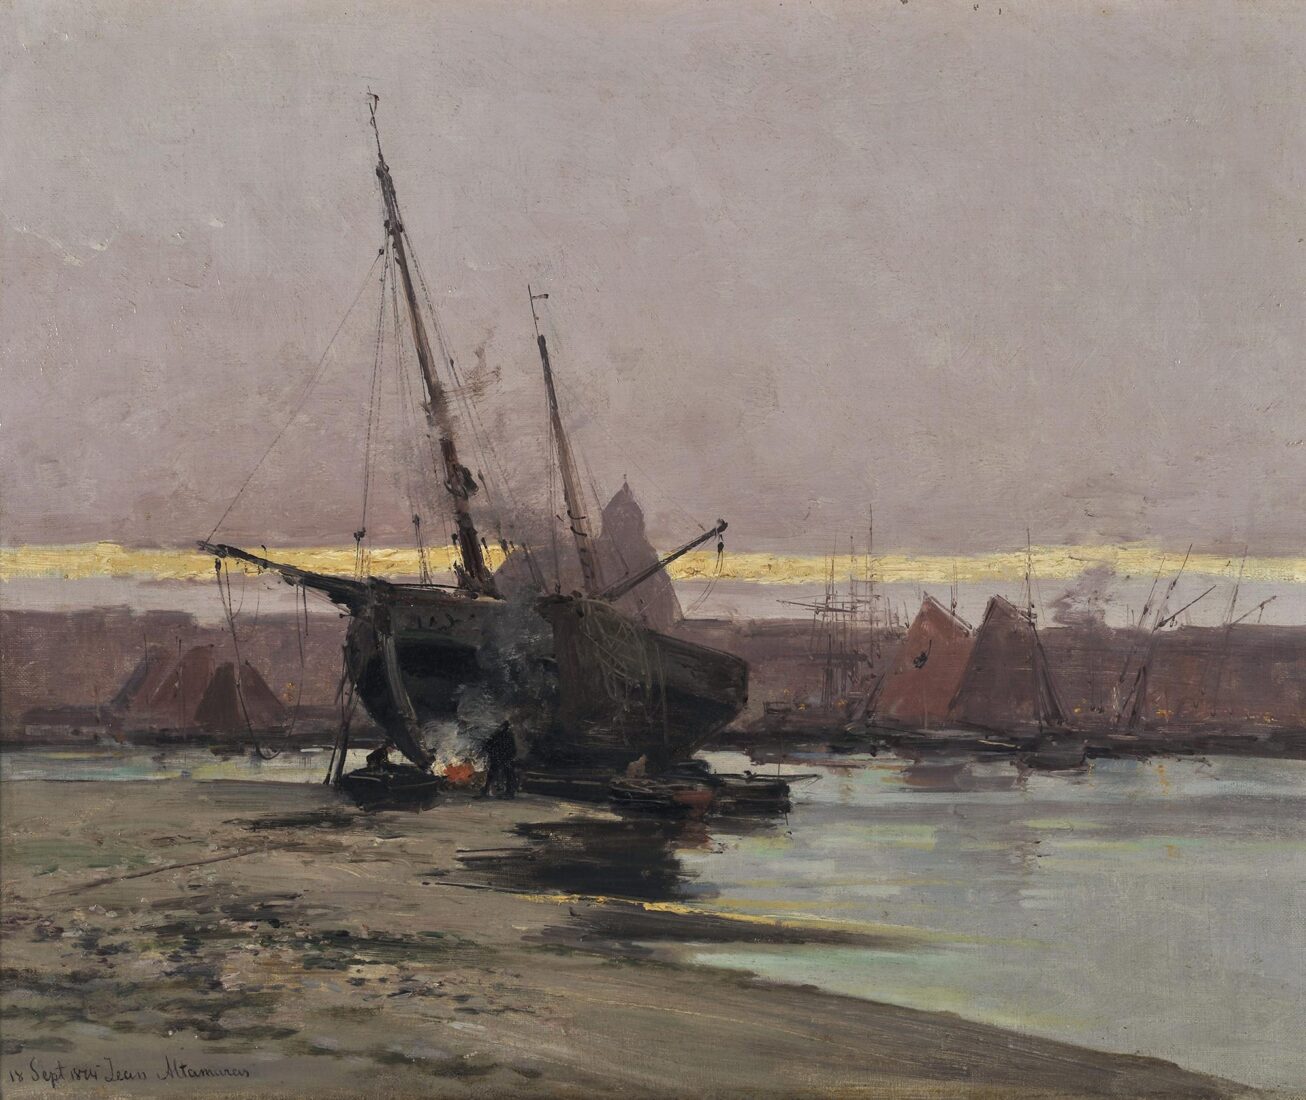 Boat on the Shore